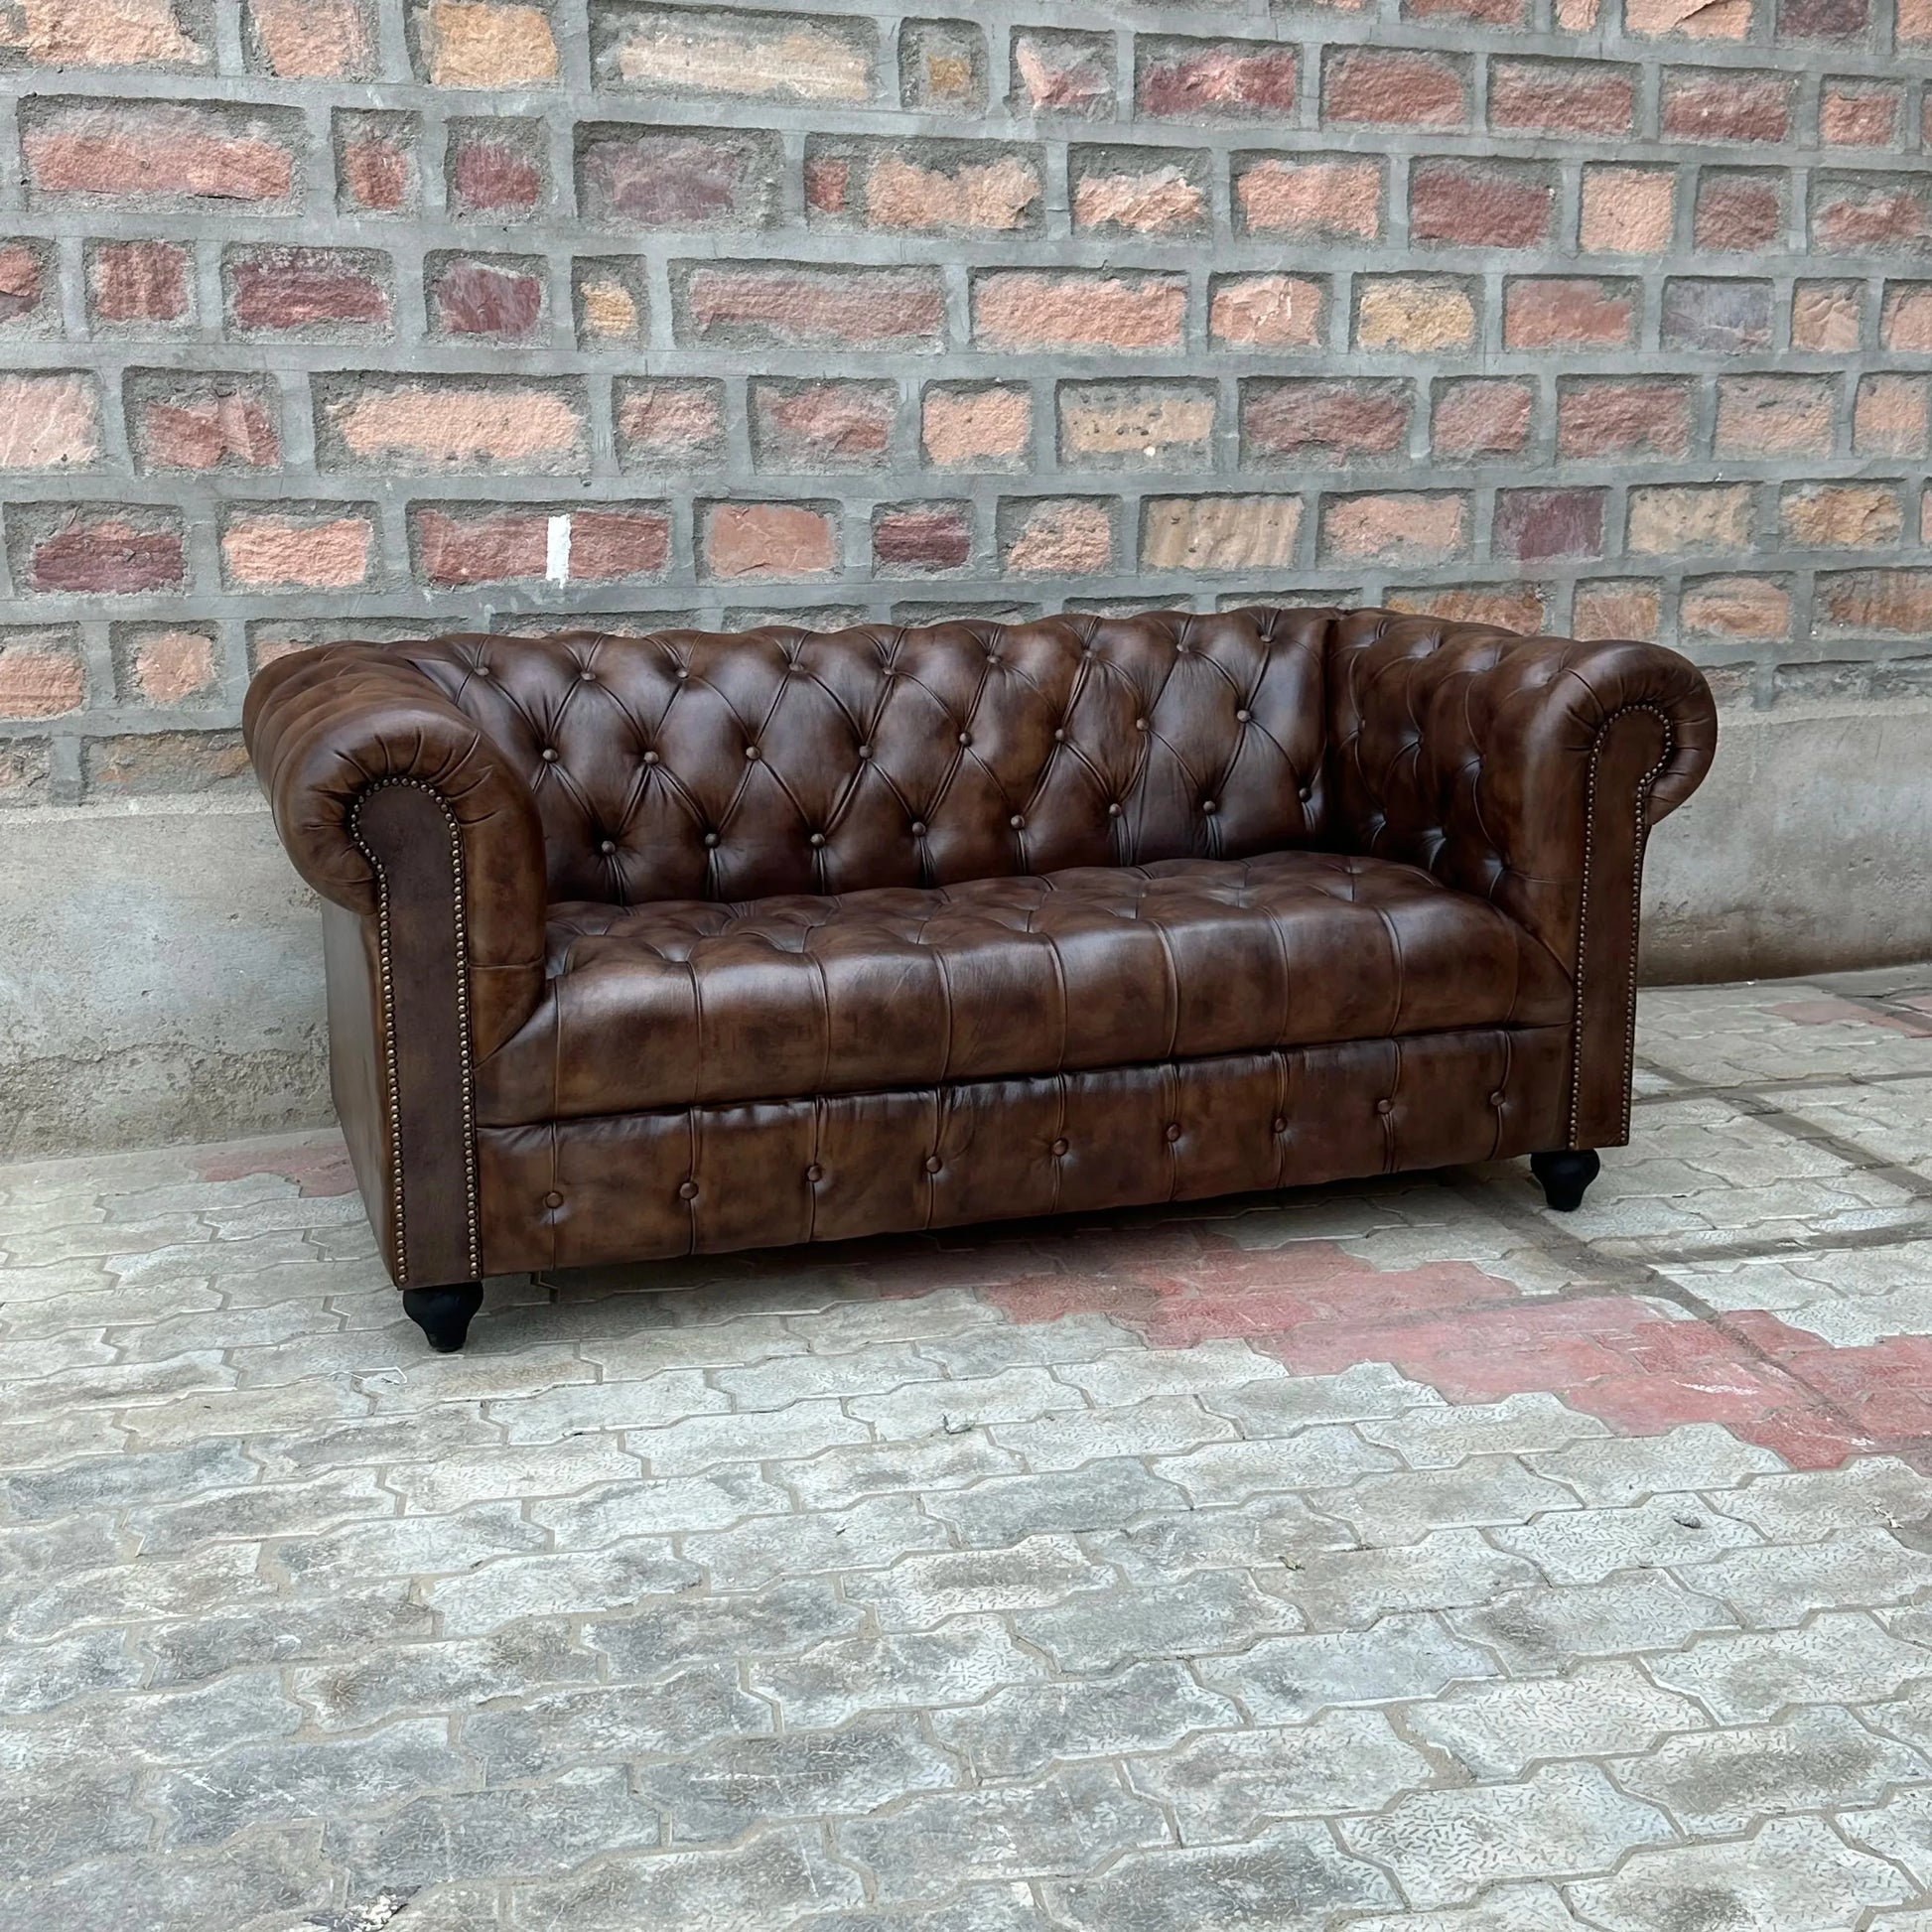 71" Loveseat Tufted Bench | Remington Chesterfield Leather Loveseat with Tufted Bench Seat (RE-2T) by Rising Tide Design Co.